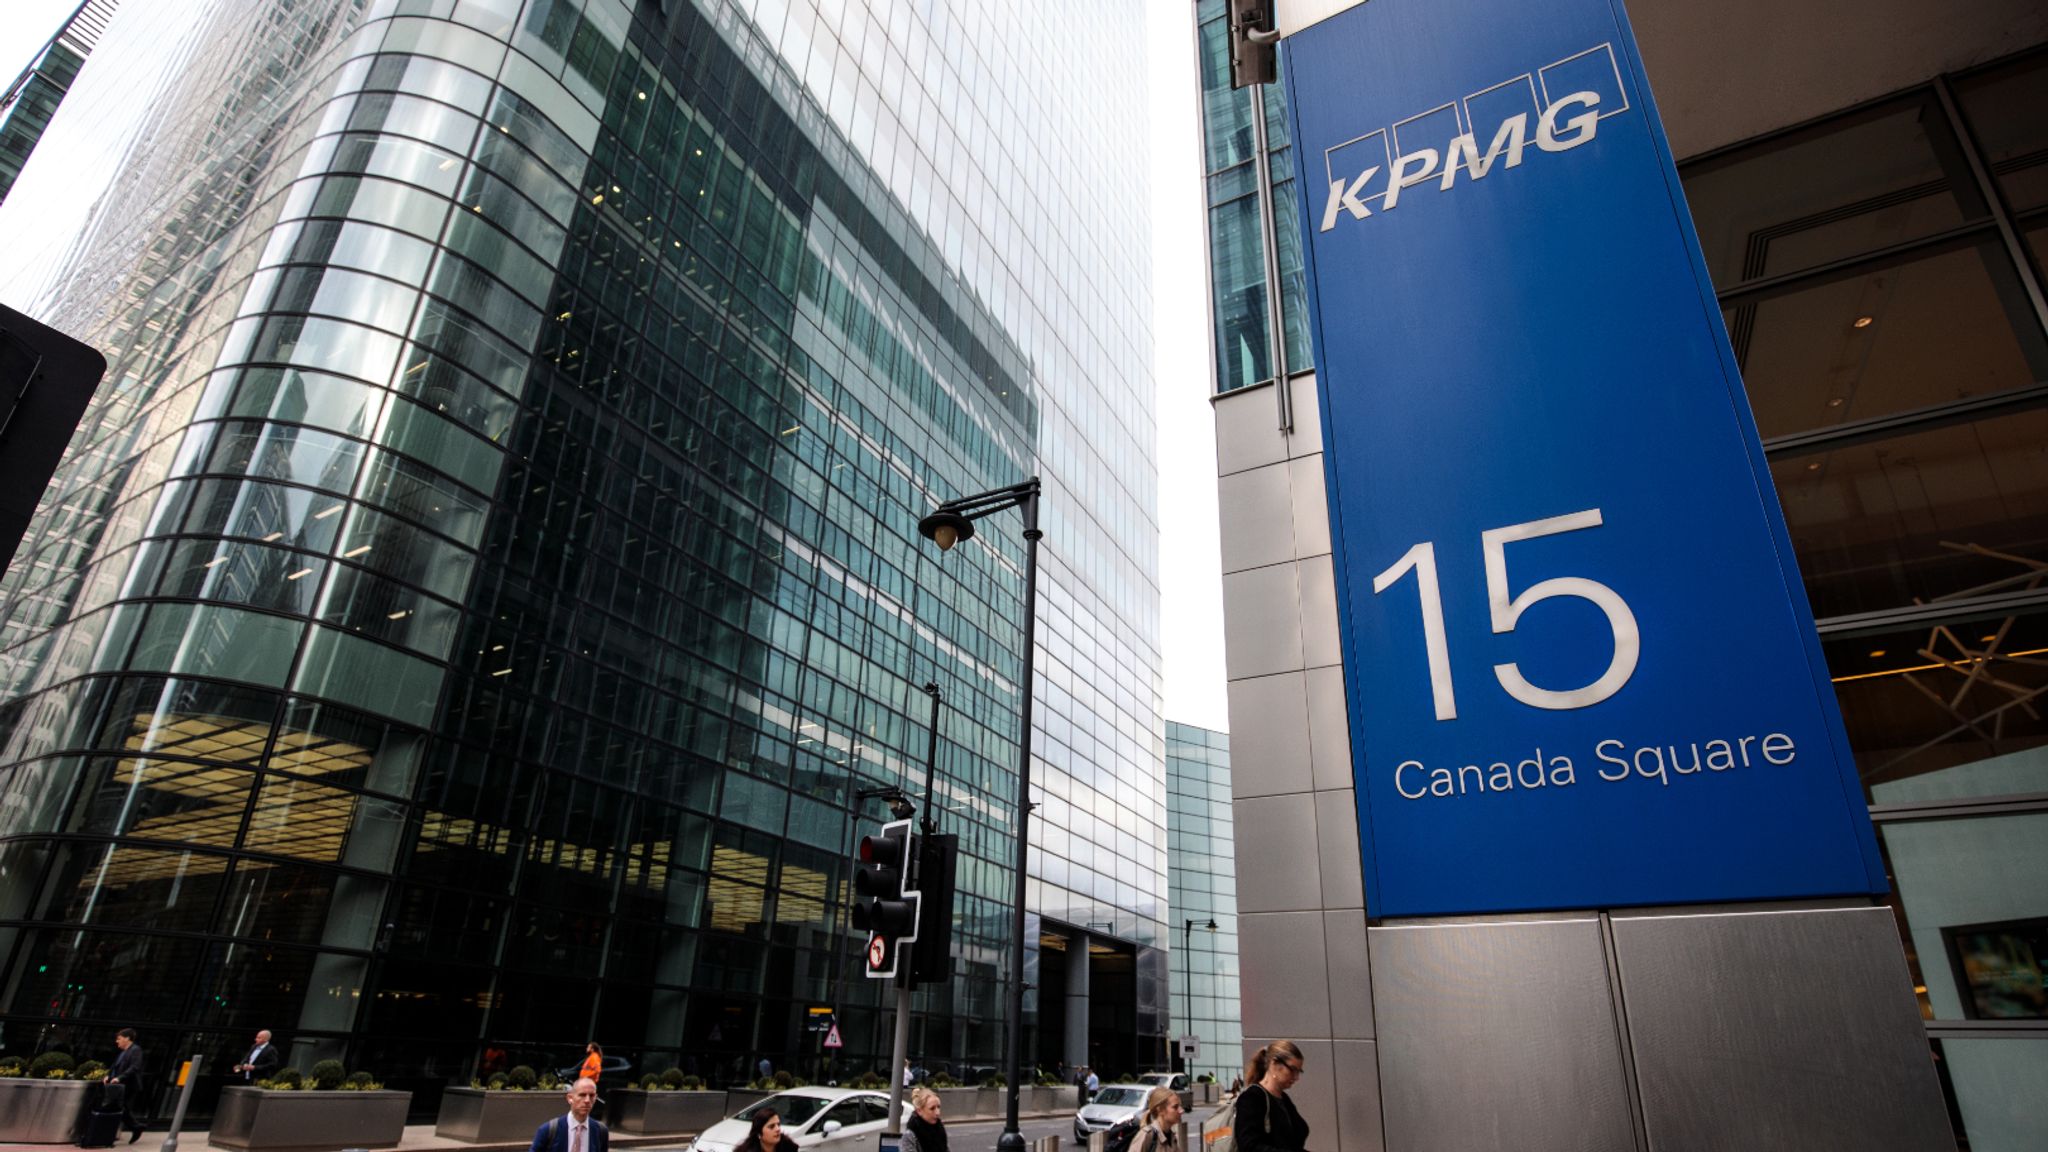 KPMG UK profit surges despite government 'ban' and string of scandals